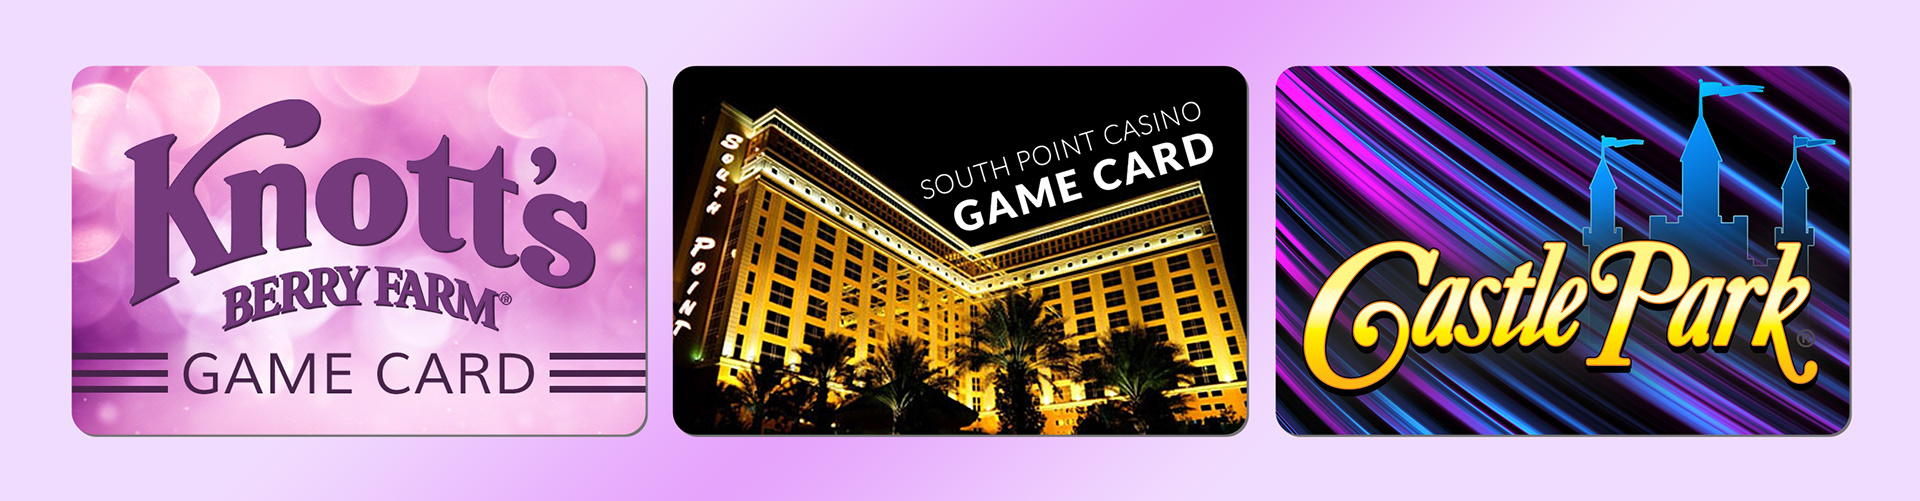 South Point Casino Playing Cards